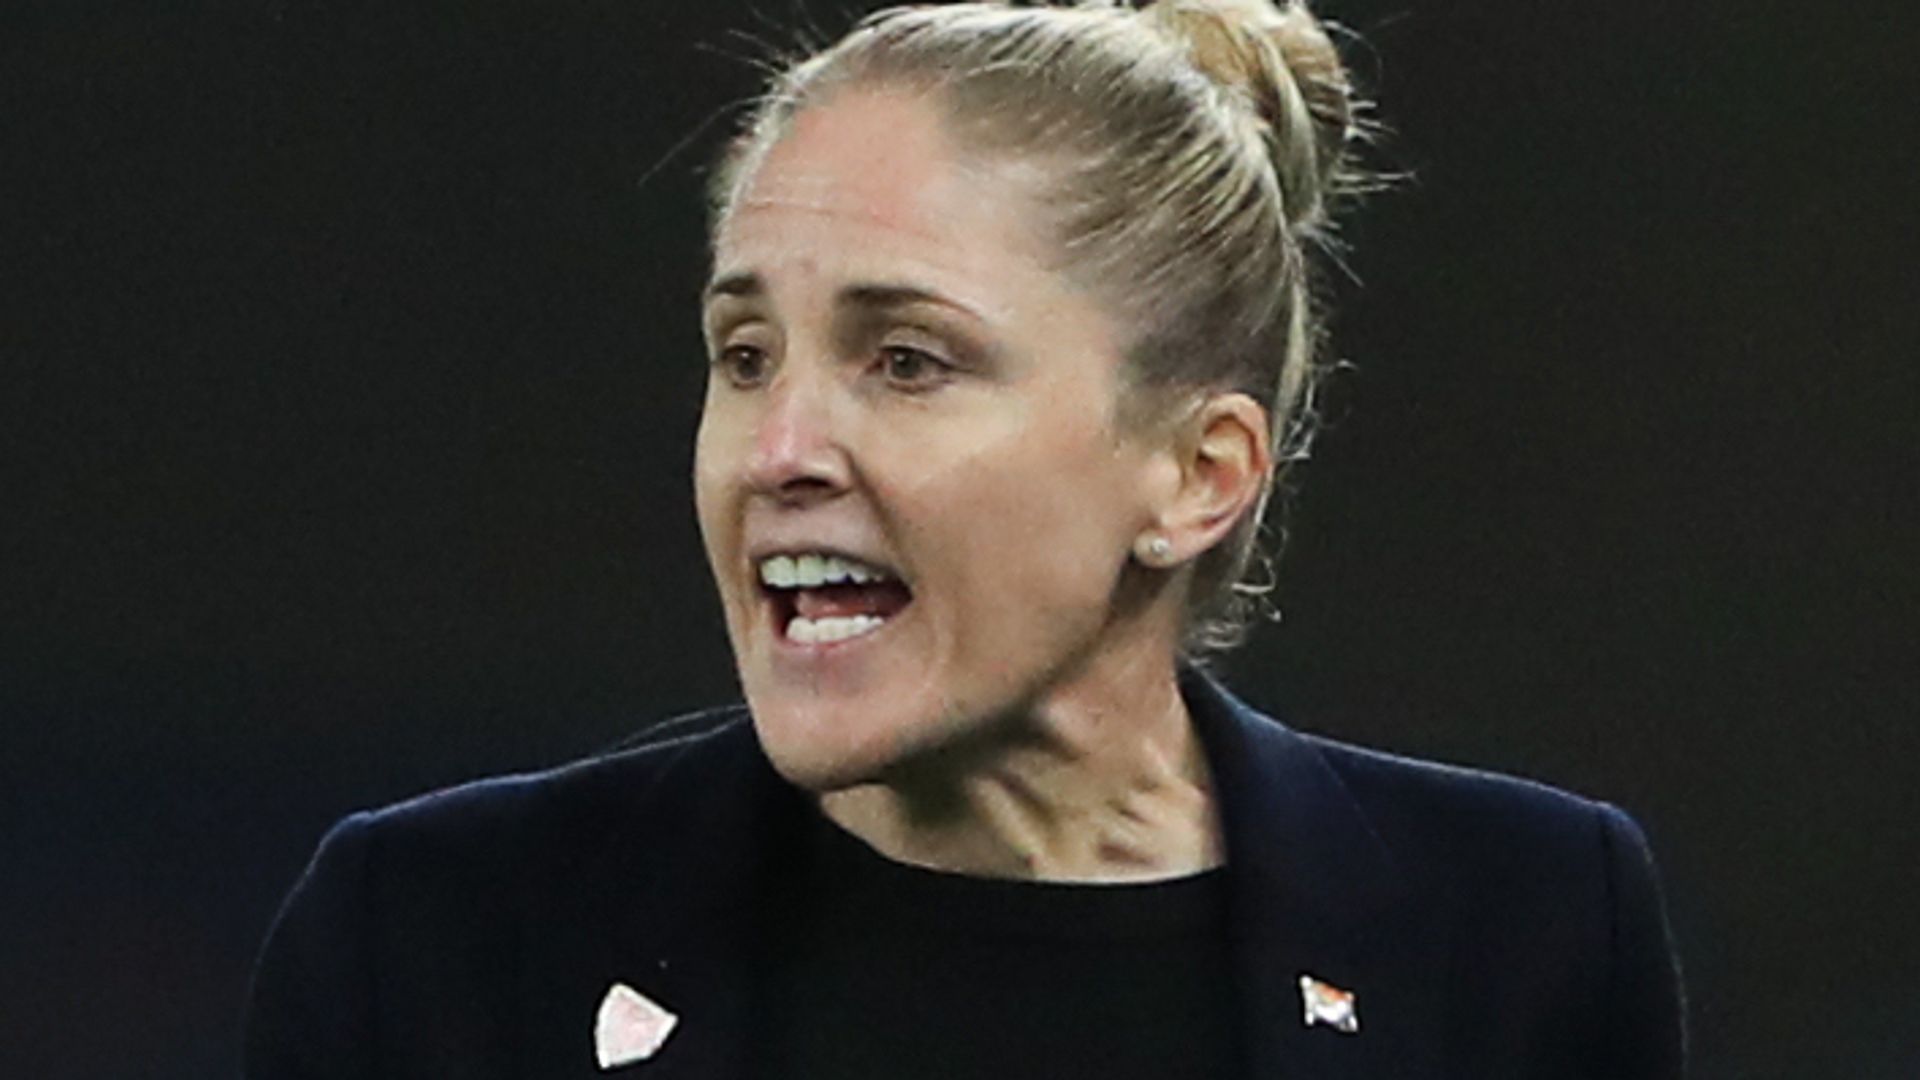 Wales Women manager Grainger signs contract extension until 2027